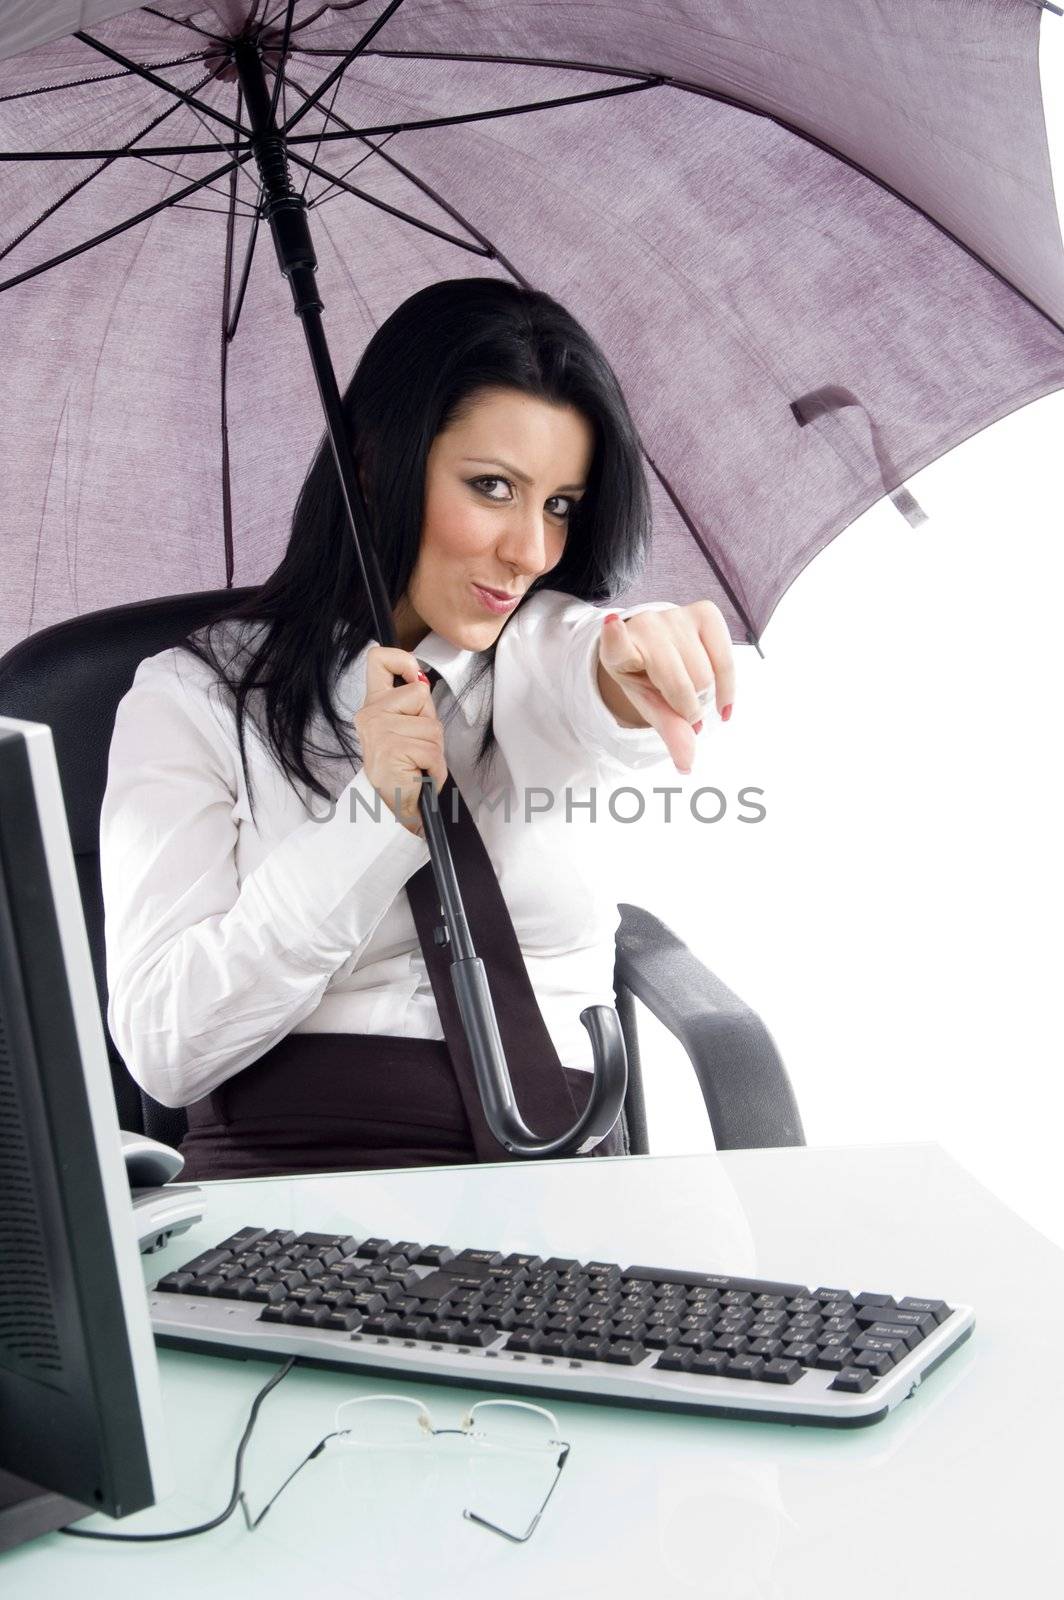 pointing woman with umbrella and computer against white background